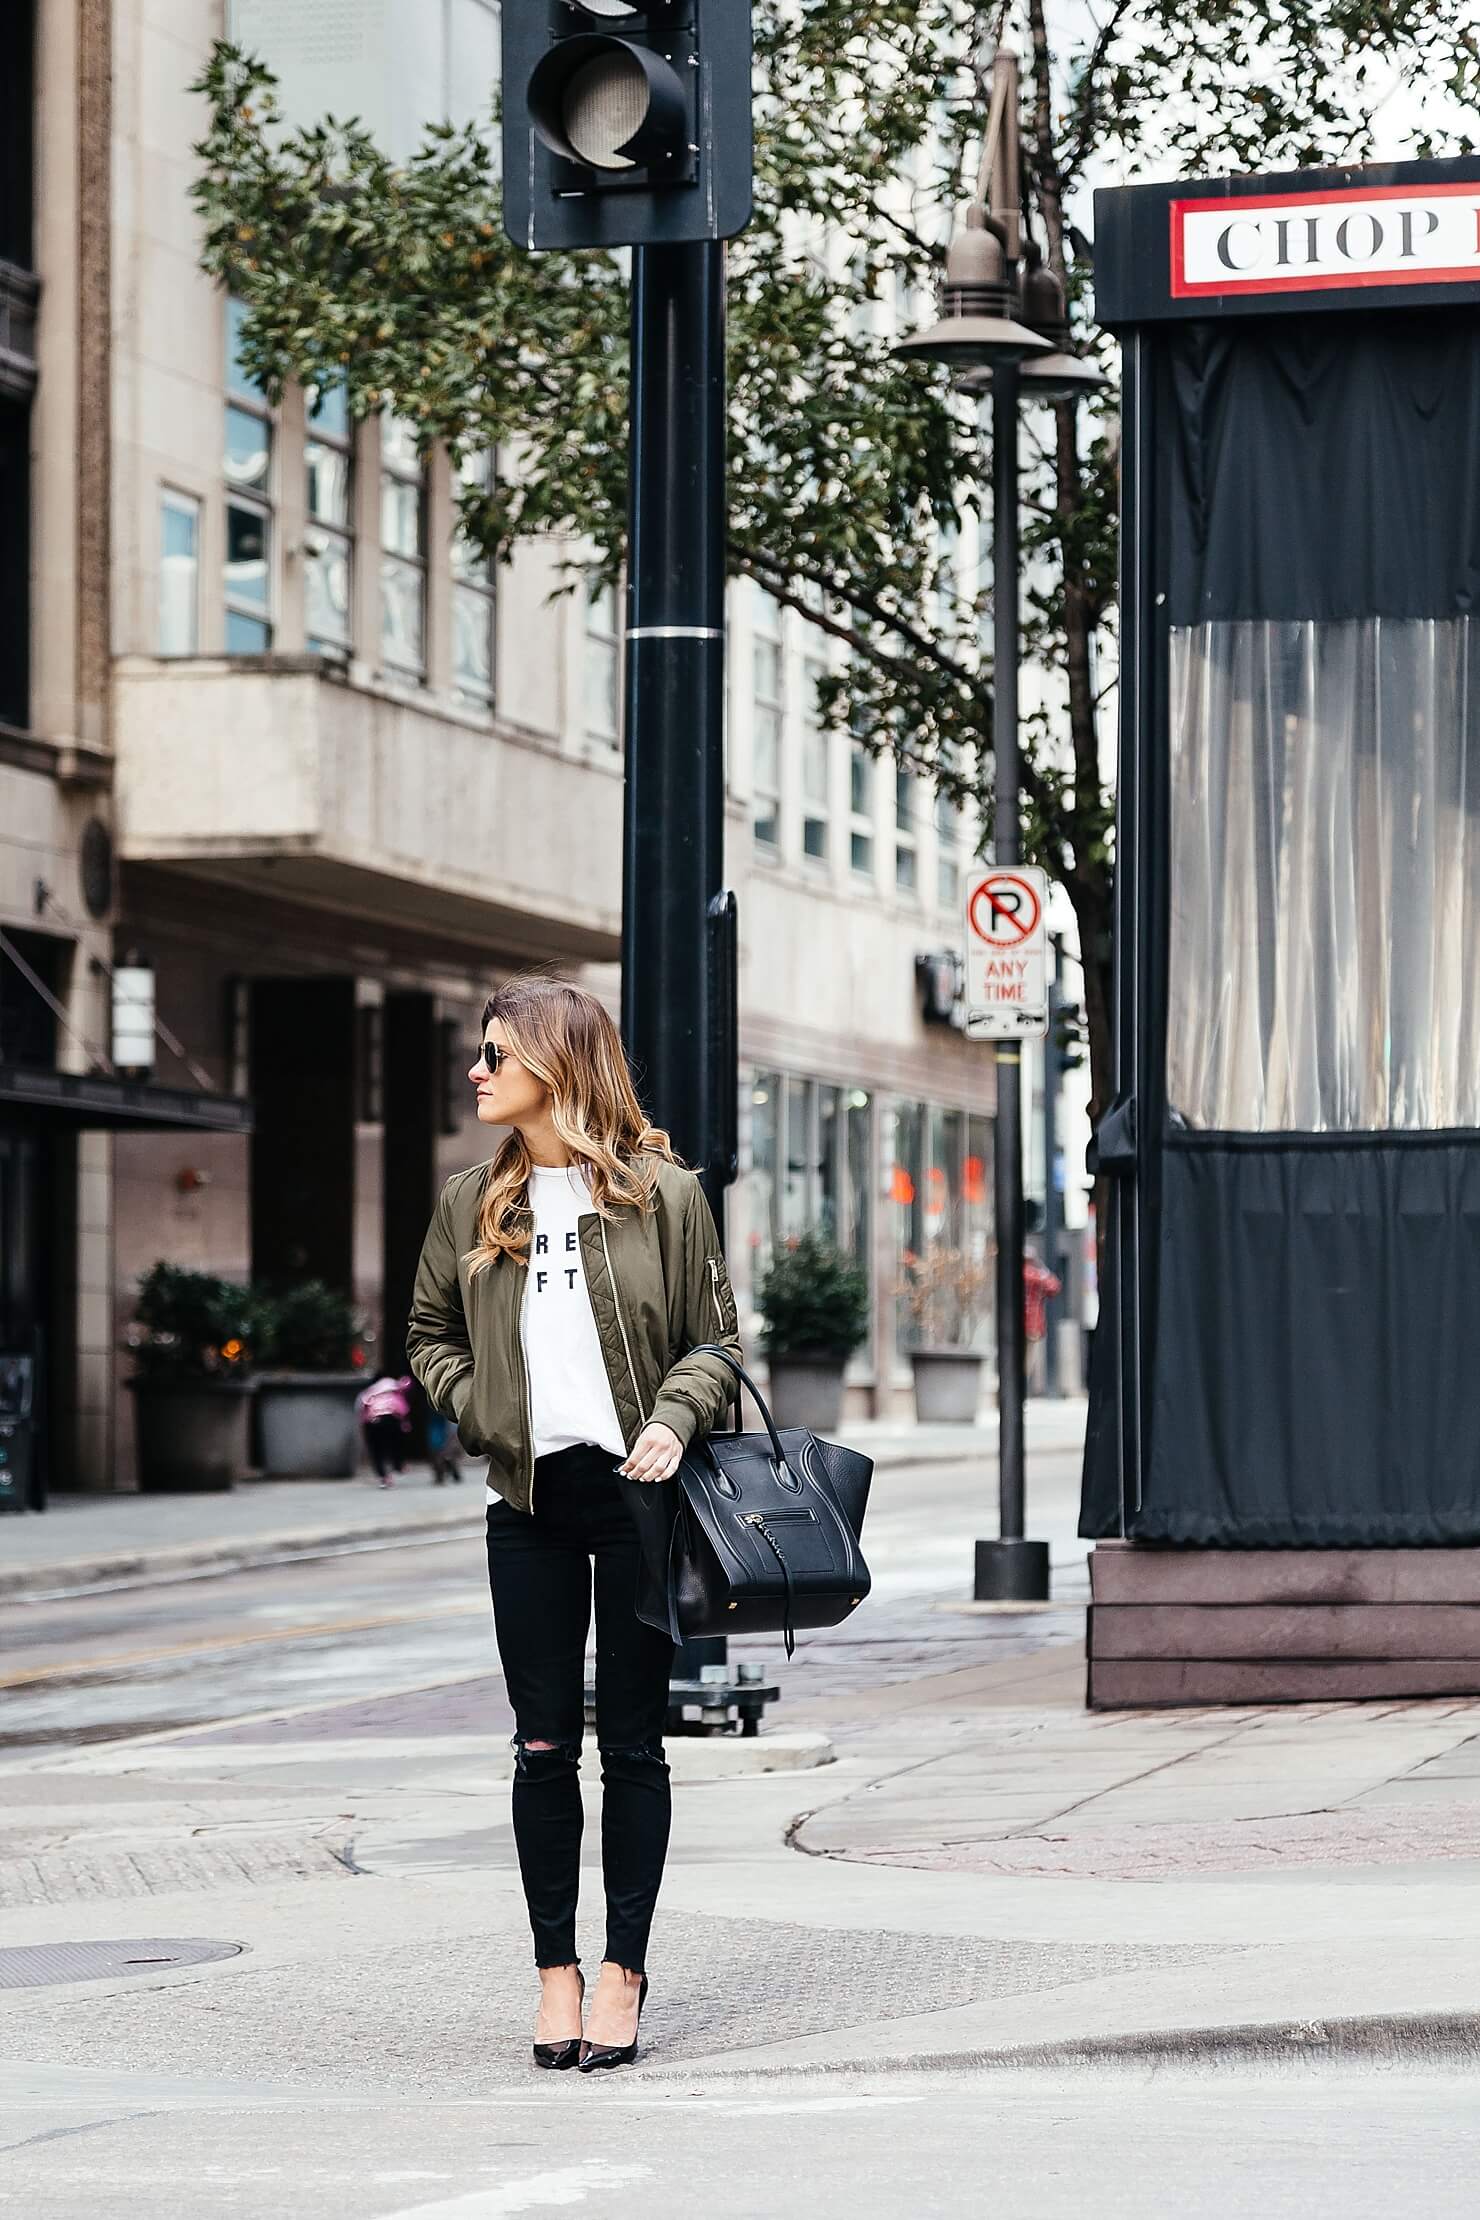 how to wear a bomber jacket, topshop olive green bomber jacket, sincerely jules dream often white tee, mother slit knee denim, patent leather pumps, dressing up a tee shirt, bomber jacket outfit